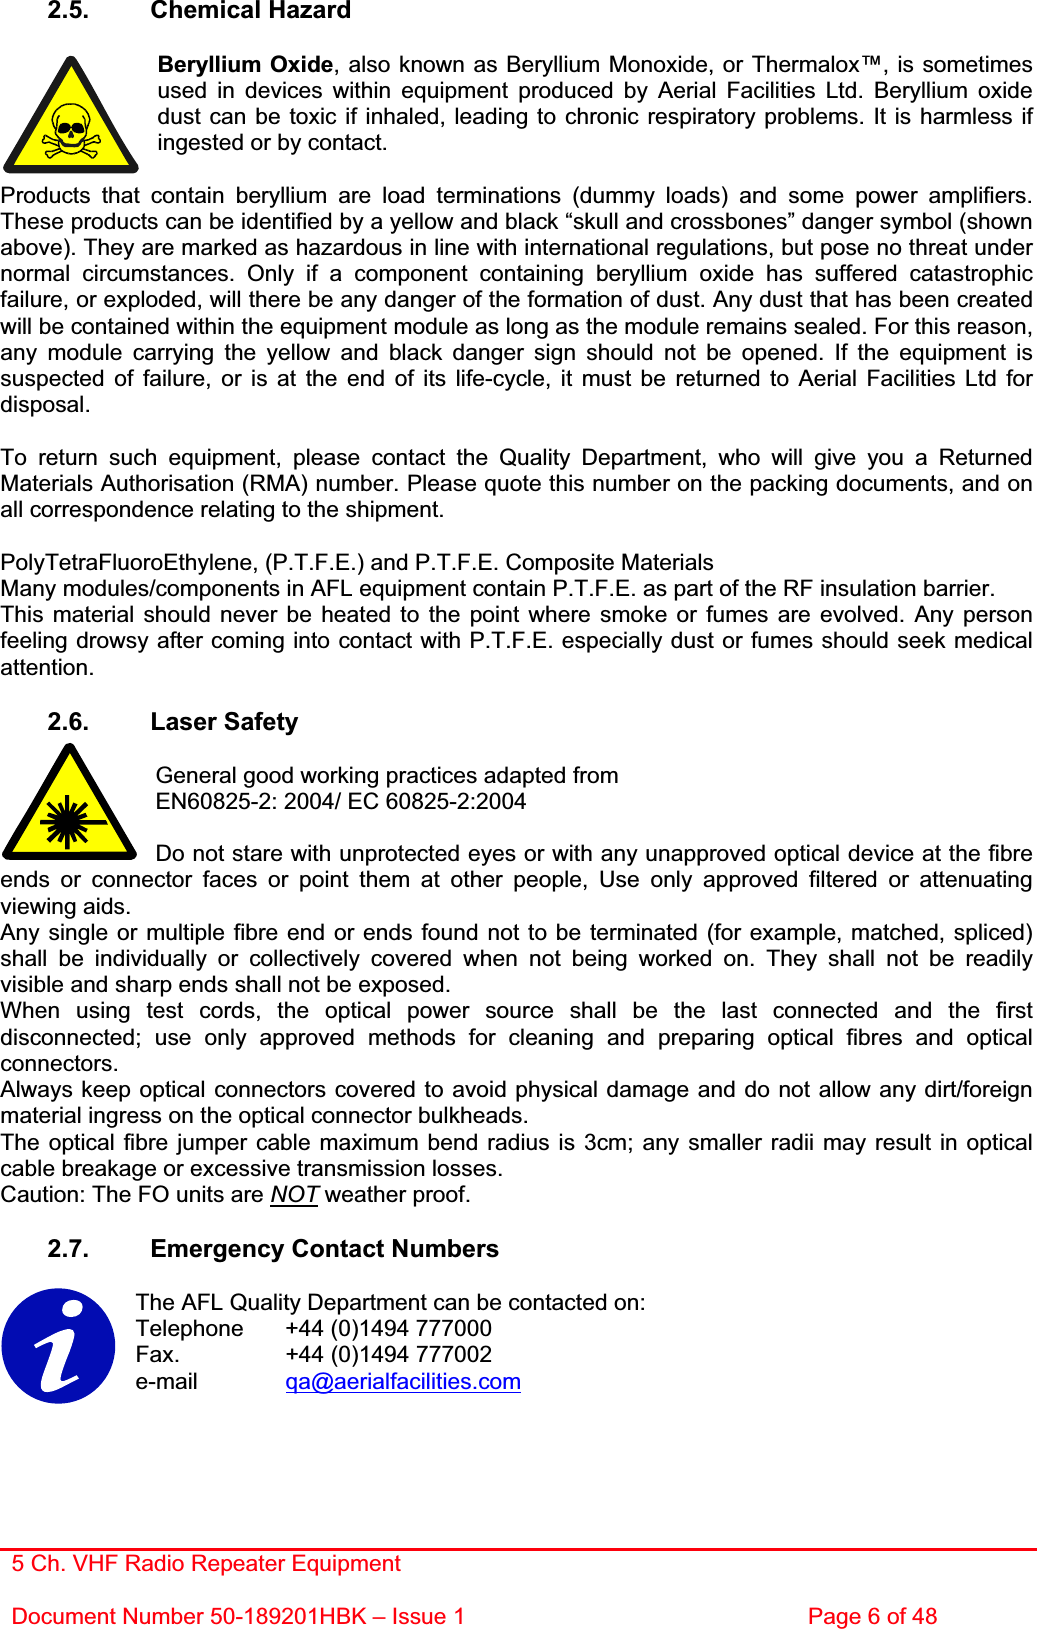 5 Ch. VHF Radio Repeater EquipmentDocument Number 50-189201HBK – Issue 1  Page 6 of 48 2.5. Chemical Hazard Beryllium Oxide, also known as Beryllium Monoxide, or Thermalox™, is sometimes used in devices within equipment produced by Aerial Facilities Ltd. Beryllium oxide dust can be toxic if inhaled, leading to chronic respiratory problems. It is harmless if ingested or by contact. Products that contain beryllium are load terminations (dummy loads) and some power amplifiers. These products can be identified by a yellow and black “skull and crossbones” danger symbol (shown above). They are marked as hazardous in line with international regulations, but pose no threat under normal circumstances. Only if a component containing beryllium oxide has suffered catastrophic failure, or exploded, will there be any danger of the formation of dust. Any dust that has been created will be contained within the equipment module as long as the module remains sealed. For this reason, any module carrying the yellow and black danger sign should not be opened. If the equipment is suspected of failure, or is at the end of its life-cycle, it must be returned to Aerial Facilities Ltd for disposal.To return such equipment, please contact the Quality Department, who will give you a Returned Materials Authorisation (RMA) number. Please quote this number on the packing documents, and on all correspondence relating to the shipment. PolyTetraFluoroEthylene, (P.T.F.E.) and P.T.F.E. Composite Materials Many modules/components in AFL equipment contain P.T.F.E. as part of the RF insulation barrier. This material should never be heated to the point where smoke or fumes are evolved. Any person feeling drowsy after coming into contact with P.T.F.E. especially dust or fumes should seek medical attention.2.6. Laser Safety General good working practices adapted from EN60825-2: 2004/ EC 60825-2:2004 Do not stare with unprotected eyes or with any unapproved optical device at the fibre ends or connector faces or point them at other people, Use only approved filtered or attenuating viewing aids. Any single or multiple fibre end or ends found not to be terminated (for example, matched, spliced) shall be individually or collectively covered when not being worked on. They shall not be readily visible and sharp ends shall not be exposed. When using test cords, the optical power source shall be the last connected and the first disconnected; use only approved methods for cleaning and preparing optical fibres and optical connectors.Always keep optical connectors covered to avoid physical damage and do not allow any dirt/foreign material ingress on the optical connector bulkheads. The optical fibre jumper cable maximum bend radius is 3cm; any smaller radii may result in optical cable breakage or excessive transmission losses. Caution: The FO units are NOT weather proof. 2.7.  Emergency Contact Numbers The AFL Quality Department can be contacted on: Telephone   +44 (0)1494 777000 Fax.    +44 (0)1494 777002 e-mail qa@aerialfacilities.com